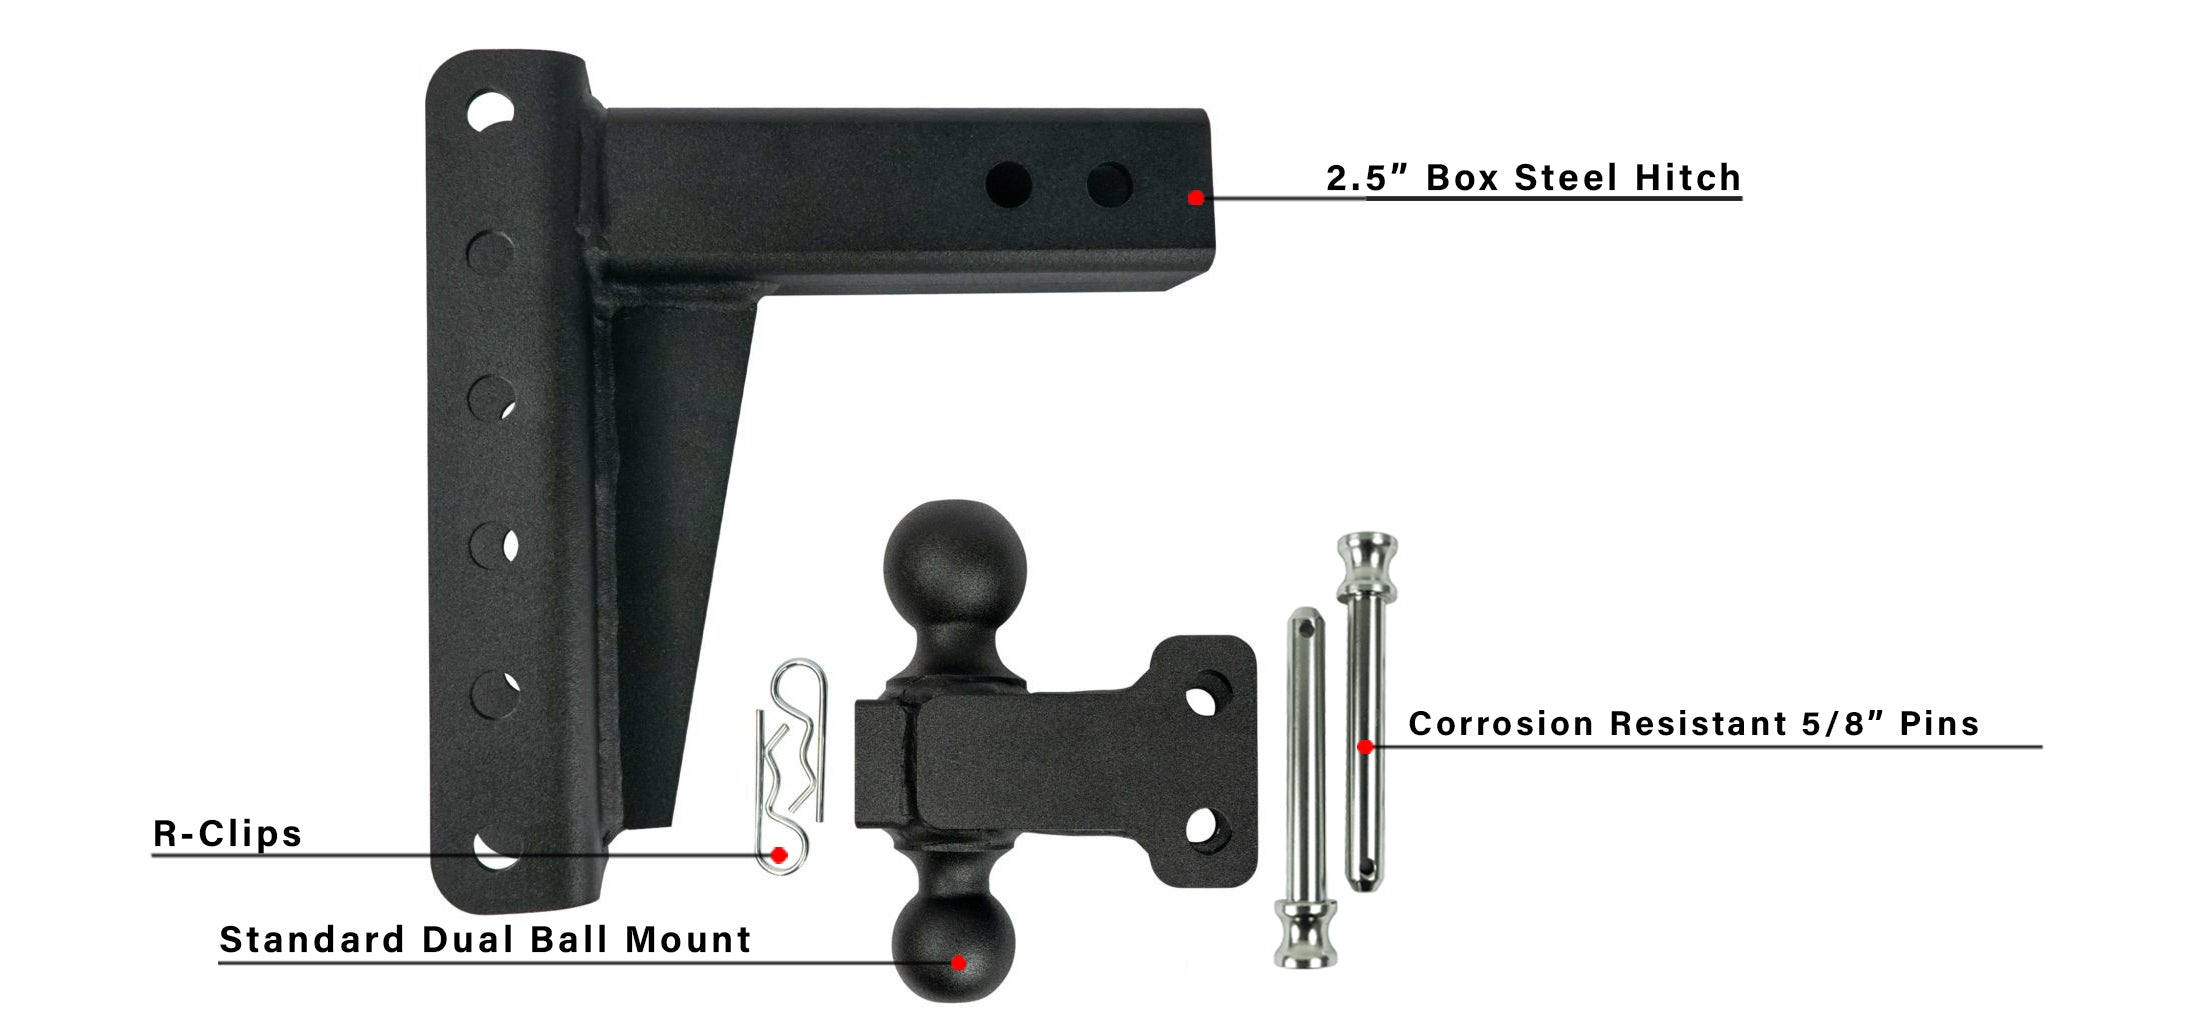 2.5" Medium Duty 6" Drop/Rise Hitch Included Parts